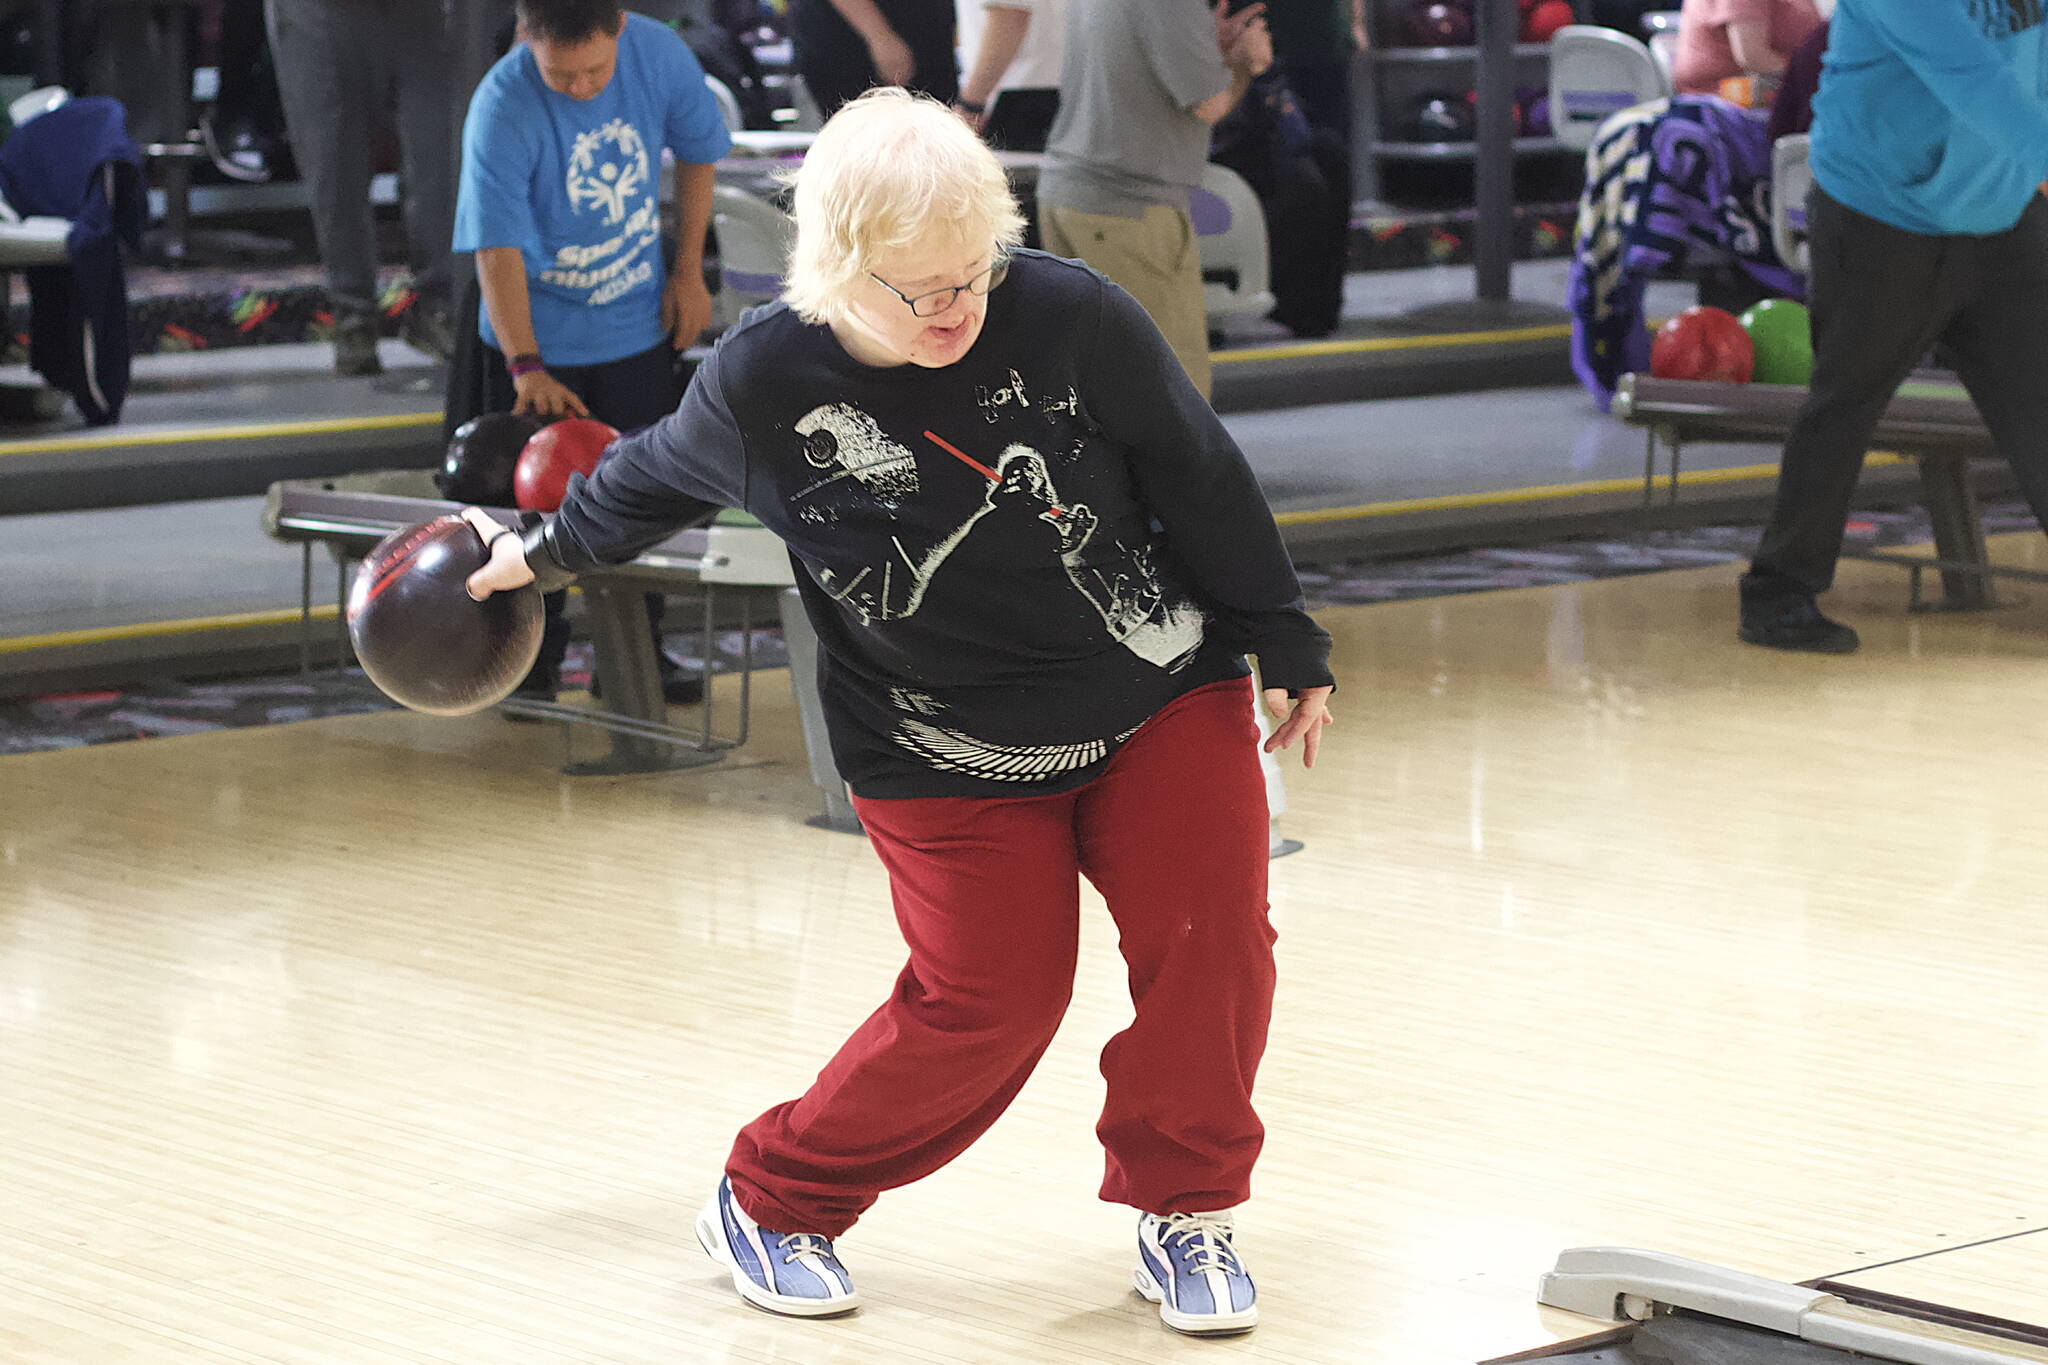 Amanda Savikko bowls a frame during the Juneau Special Olympics local games Sunday at Pinz bowling ally, where teams and participants were selected for the upcoming state games in Eagle River. (Mark Sabbatini / Juneau Empire)